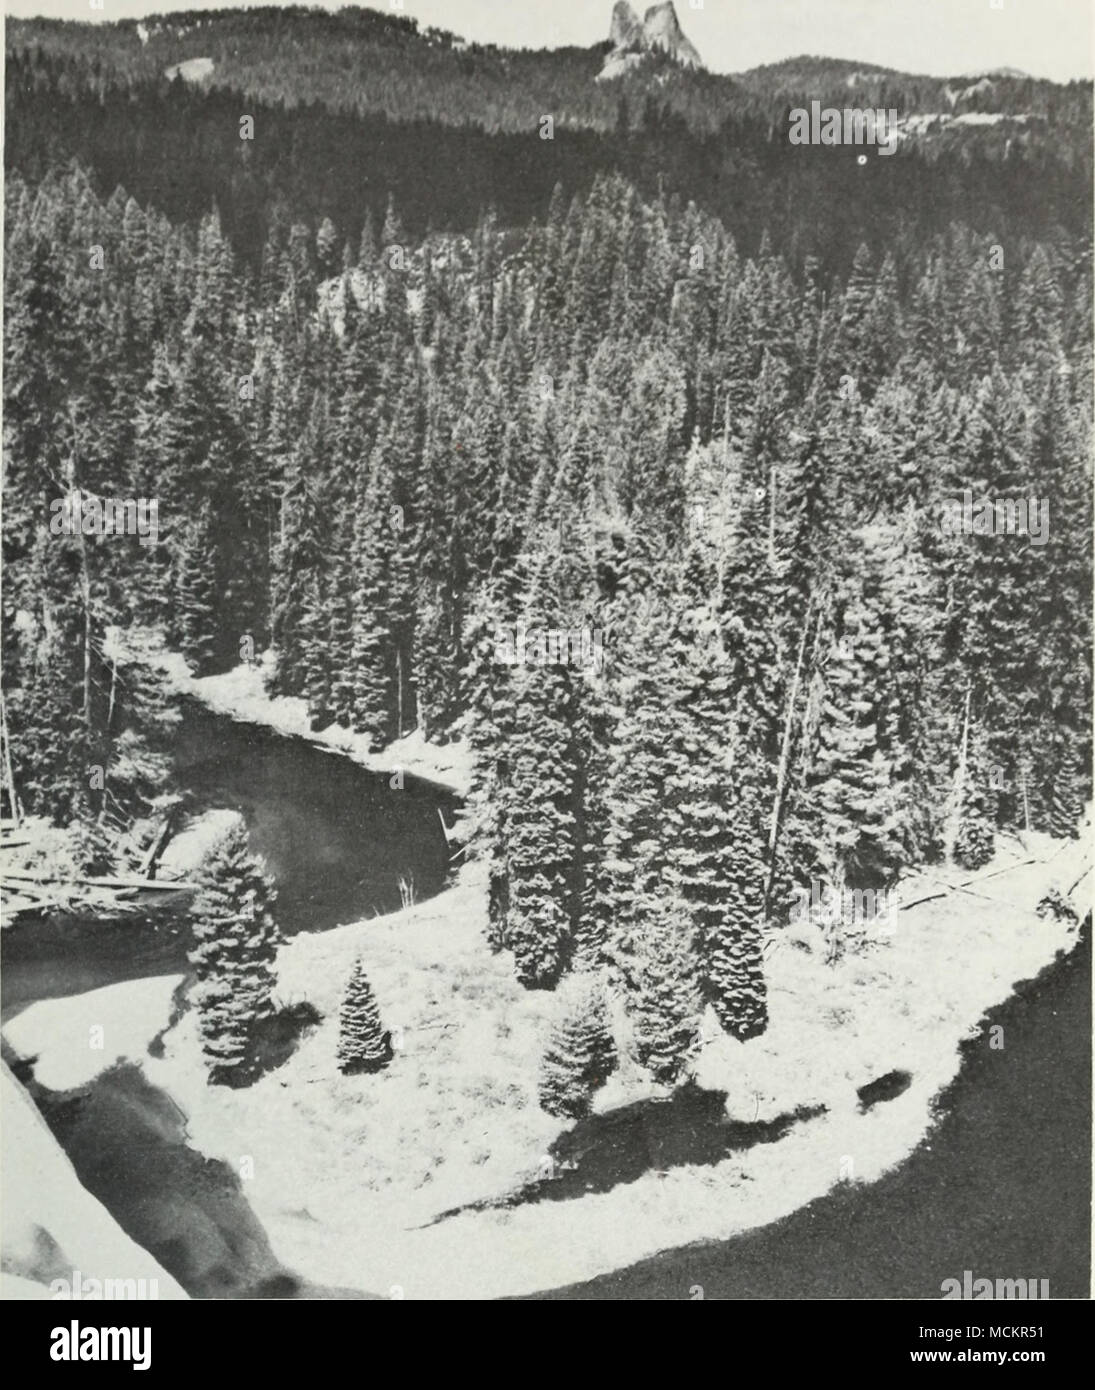 . Fig. 5. Mixed Conifer Forest north of Union Creek at 1,219 m. Franklin and Dyrness (1973) differentiated this communitA' into two zones. The western Siski^^ou Mountains are considered to be in the Mixed-Evergreen {Pseudotsuga-'^QQTo)) Zone. The most dominant tree species are Pseudotsuga menziesii and Lithocarpus densifloriis. The west slope of the Cascades and the eastern Siskiyou Mountains are considered in their Mixed-Conifer {Pimis-Pseudotsuga- Libocedrus-Abies) Zone, which includes as dominant trees Pseudotsuga Stock Photo